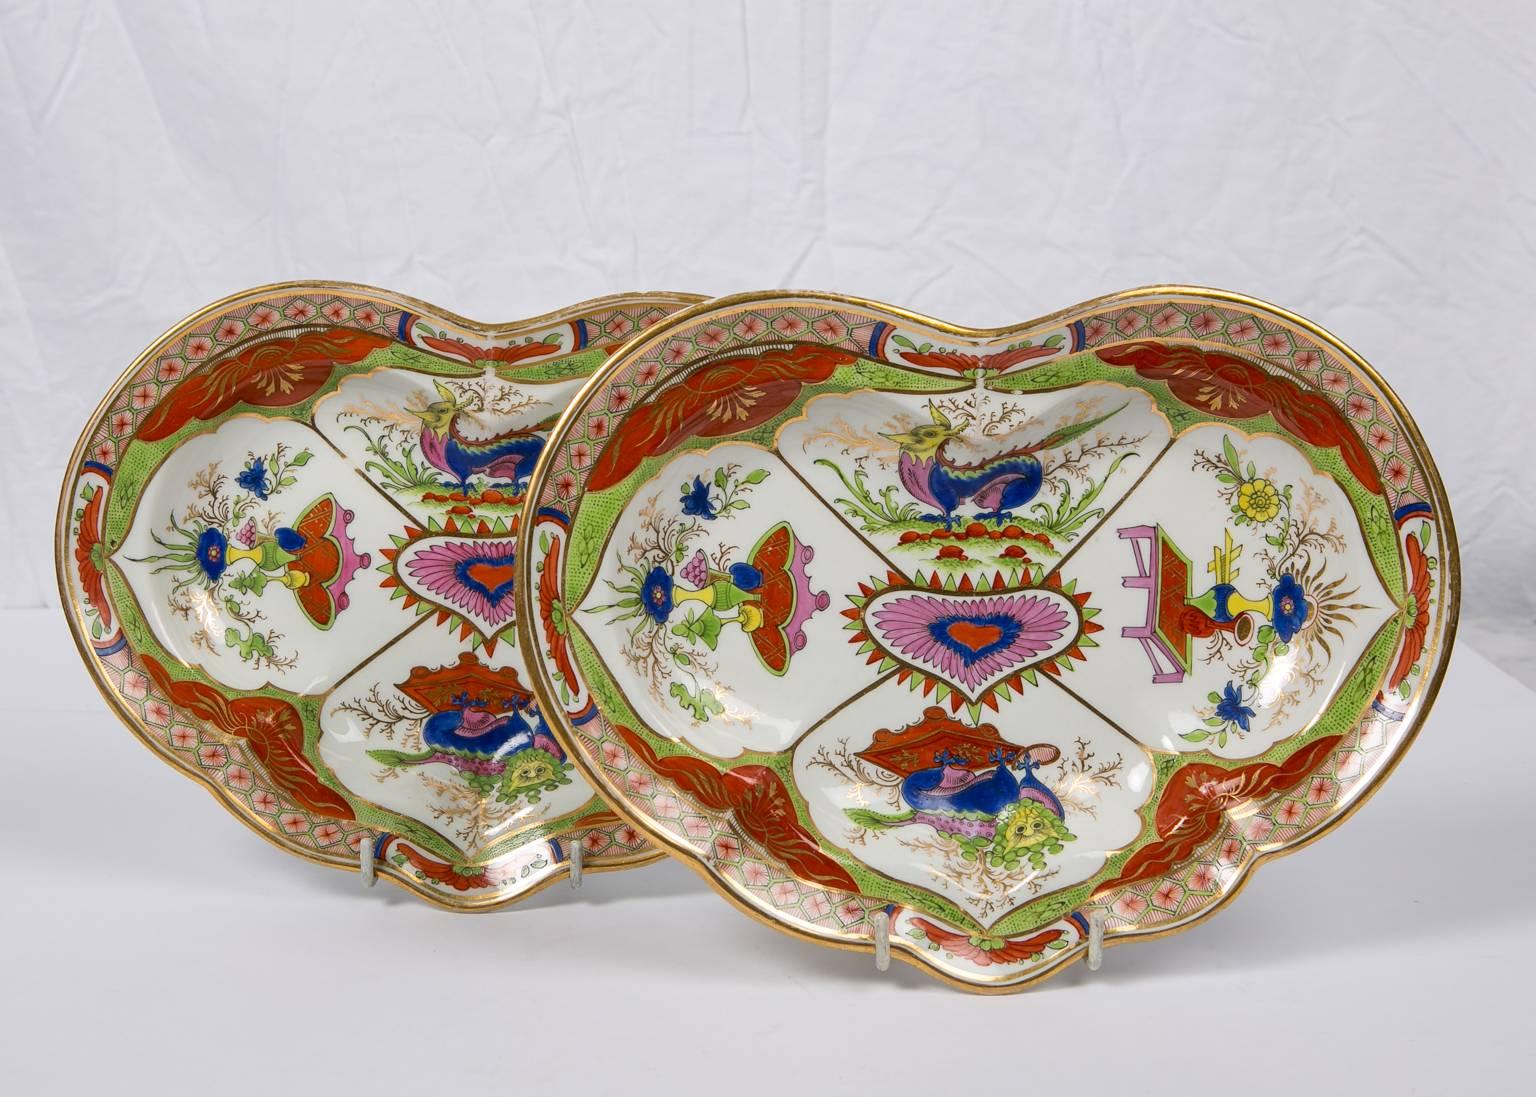 Regency Worcester Porcelain Dragon in Compartments Heart Shaped Dishes, Pair